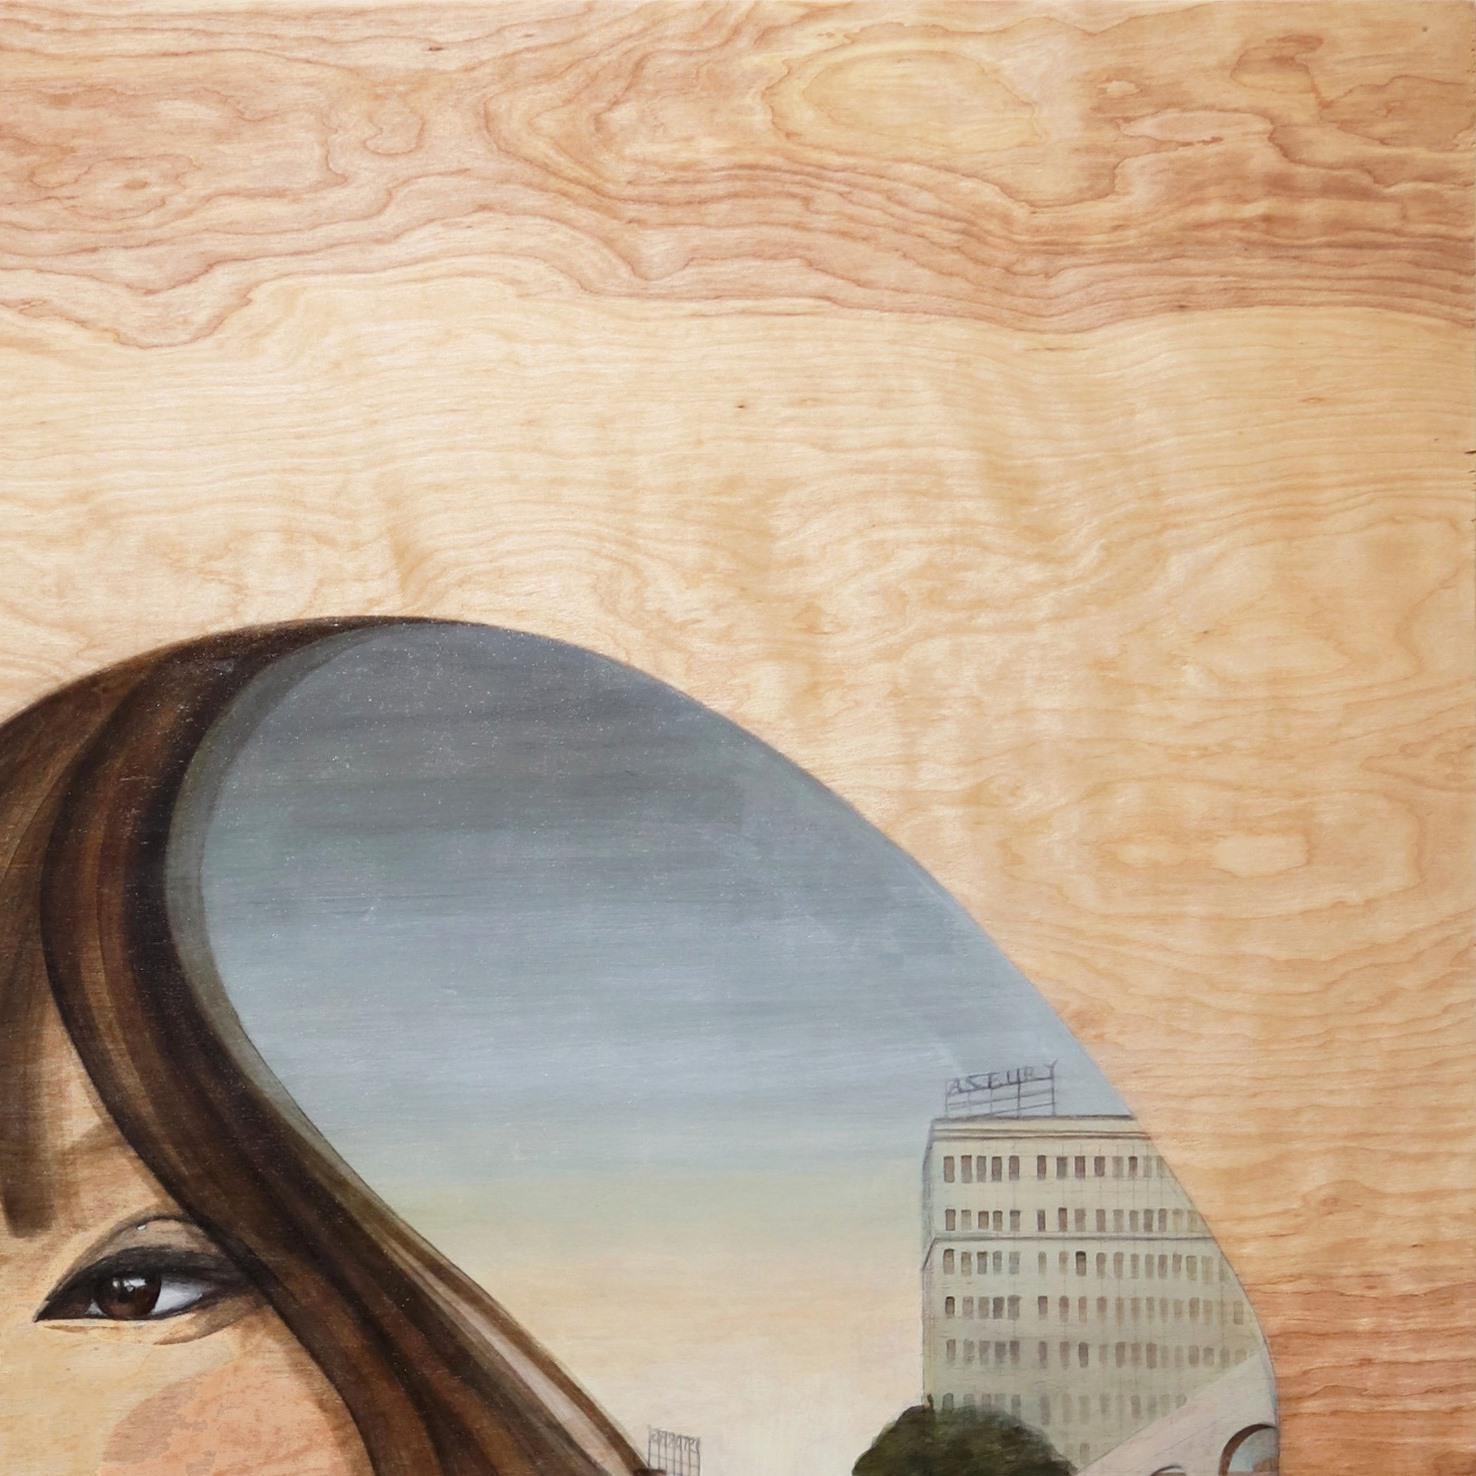 Carondelet - Figurative Surrealist Portrait Landscape Paintings on Exposed Wood - Beige Abstract Painting by Eddy Lee